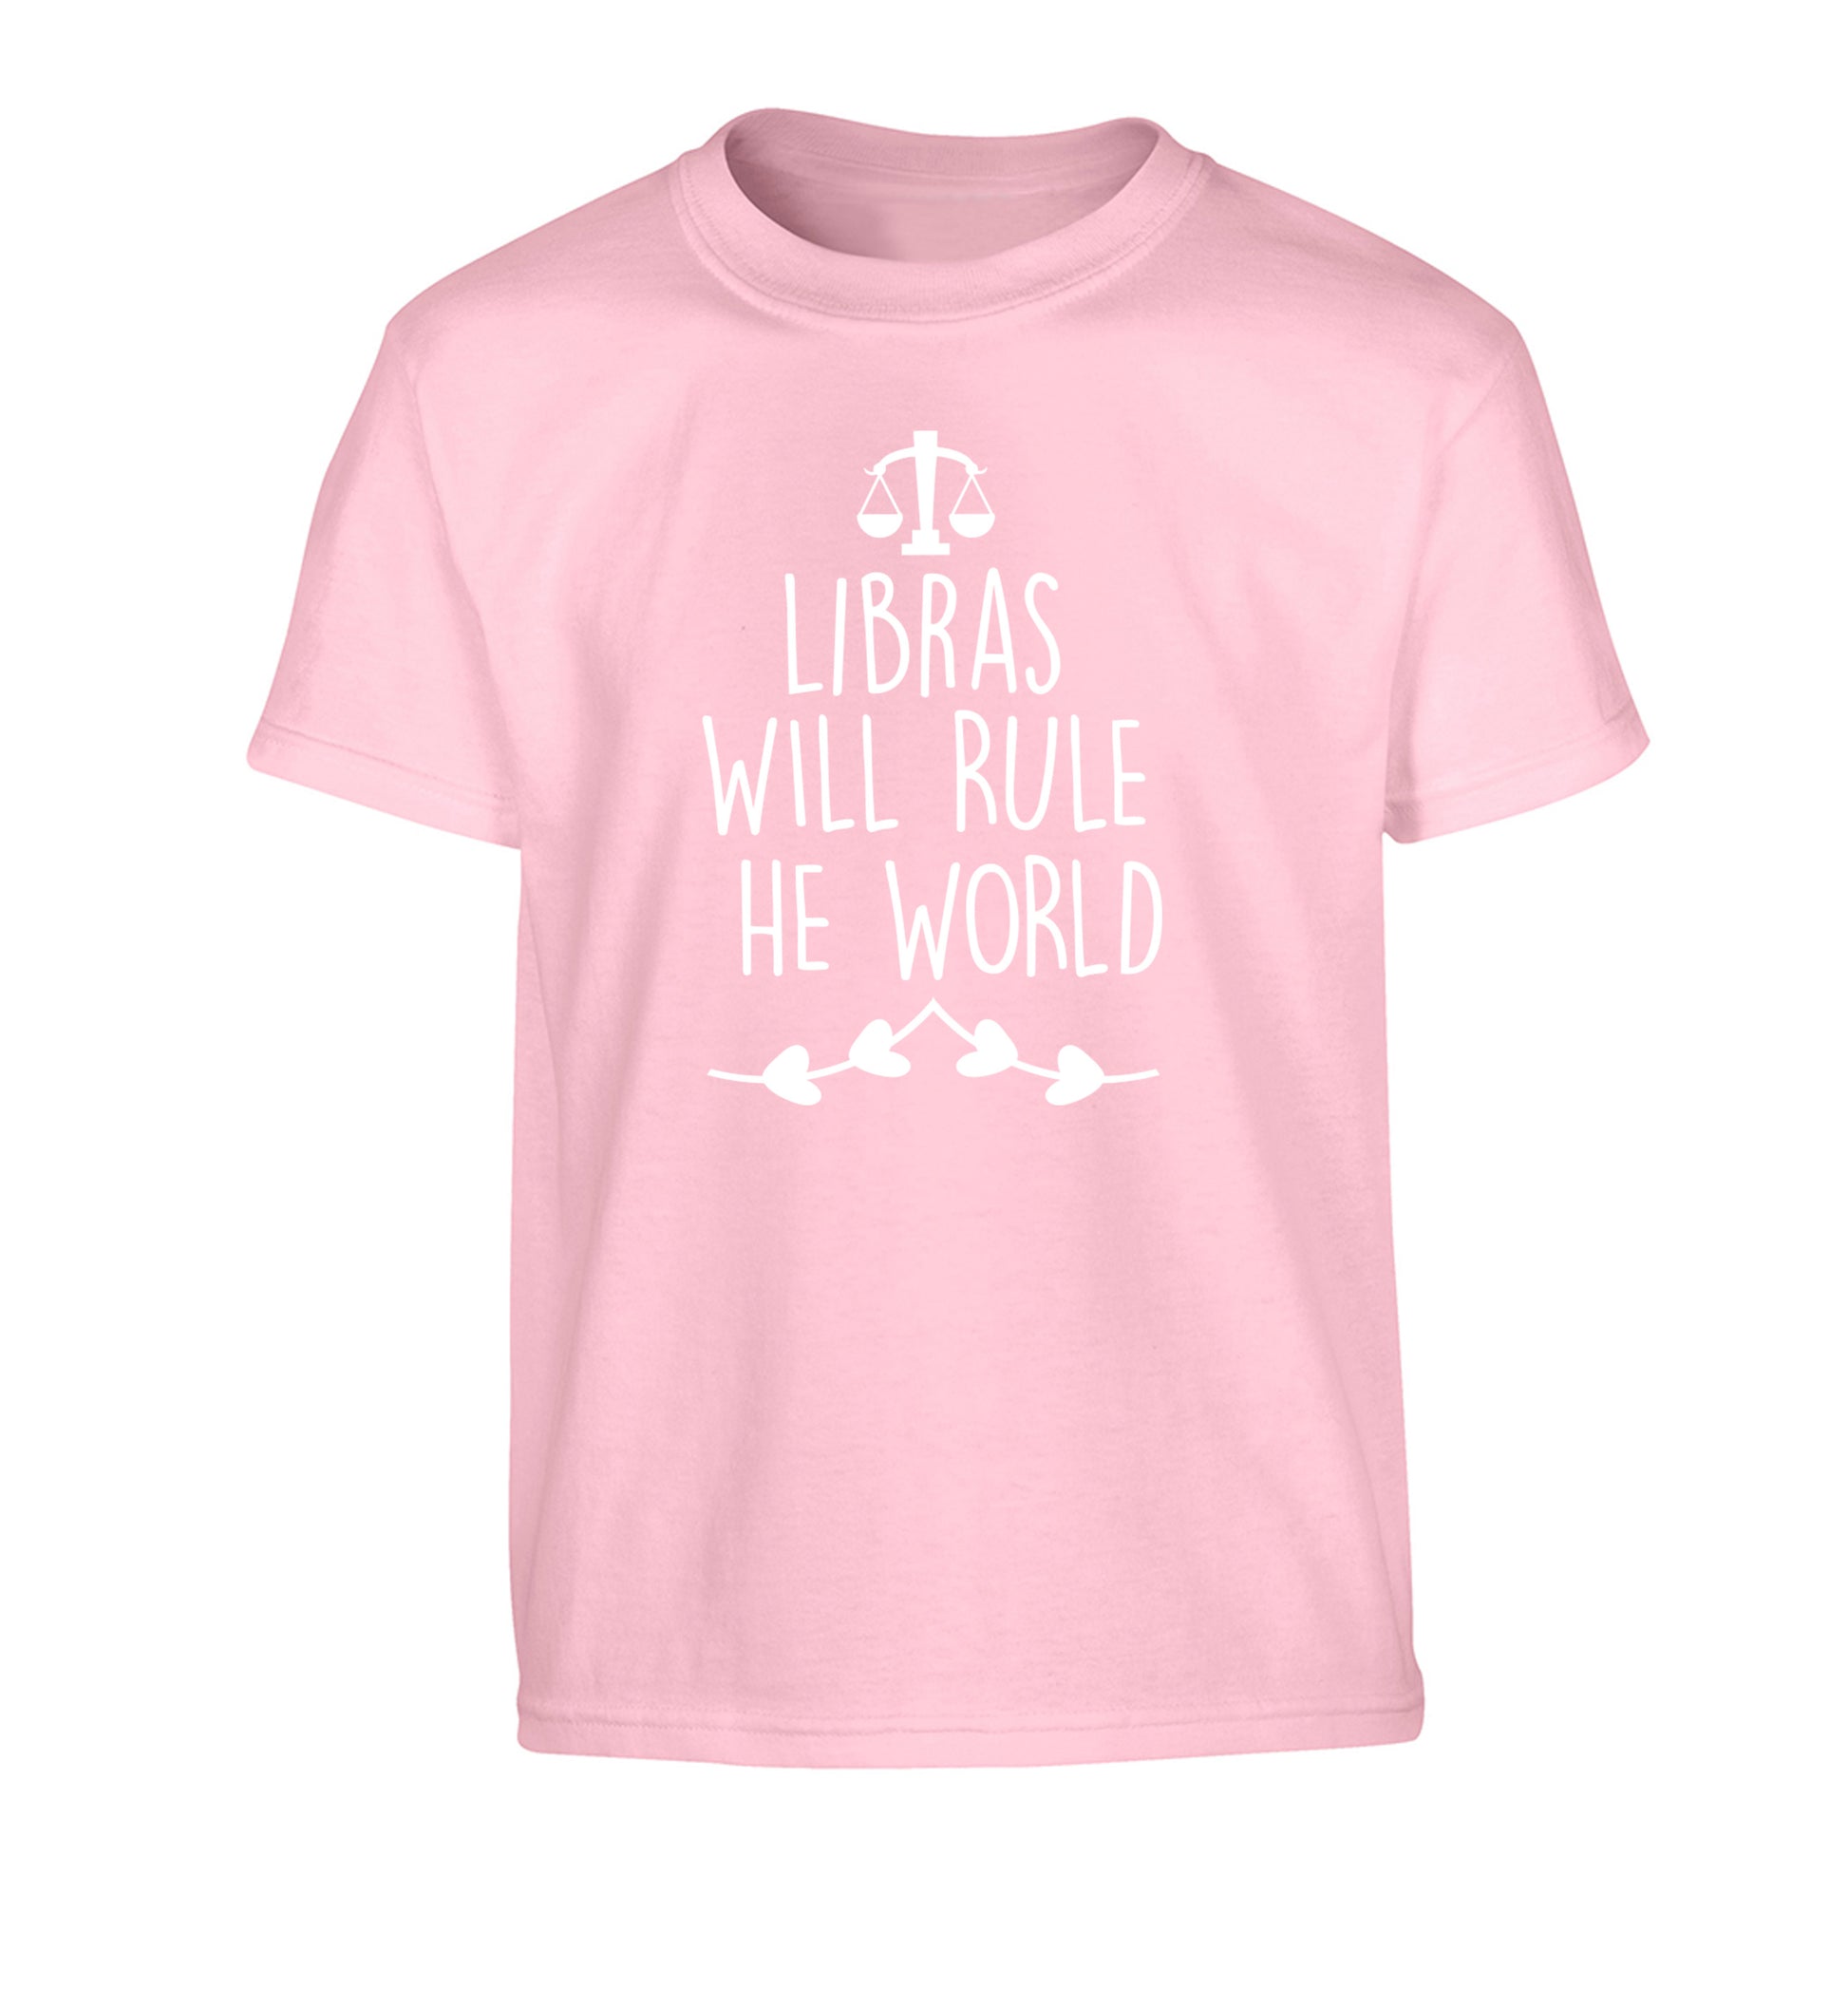 Libras will rule the world Children's light pink Tshirt 12-13 Years